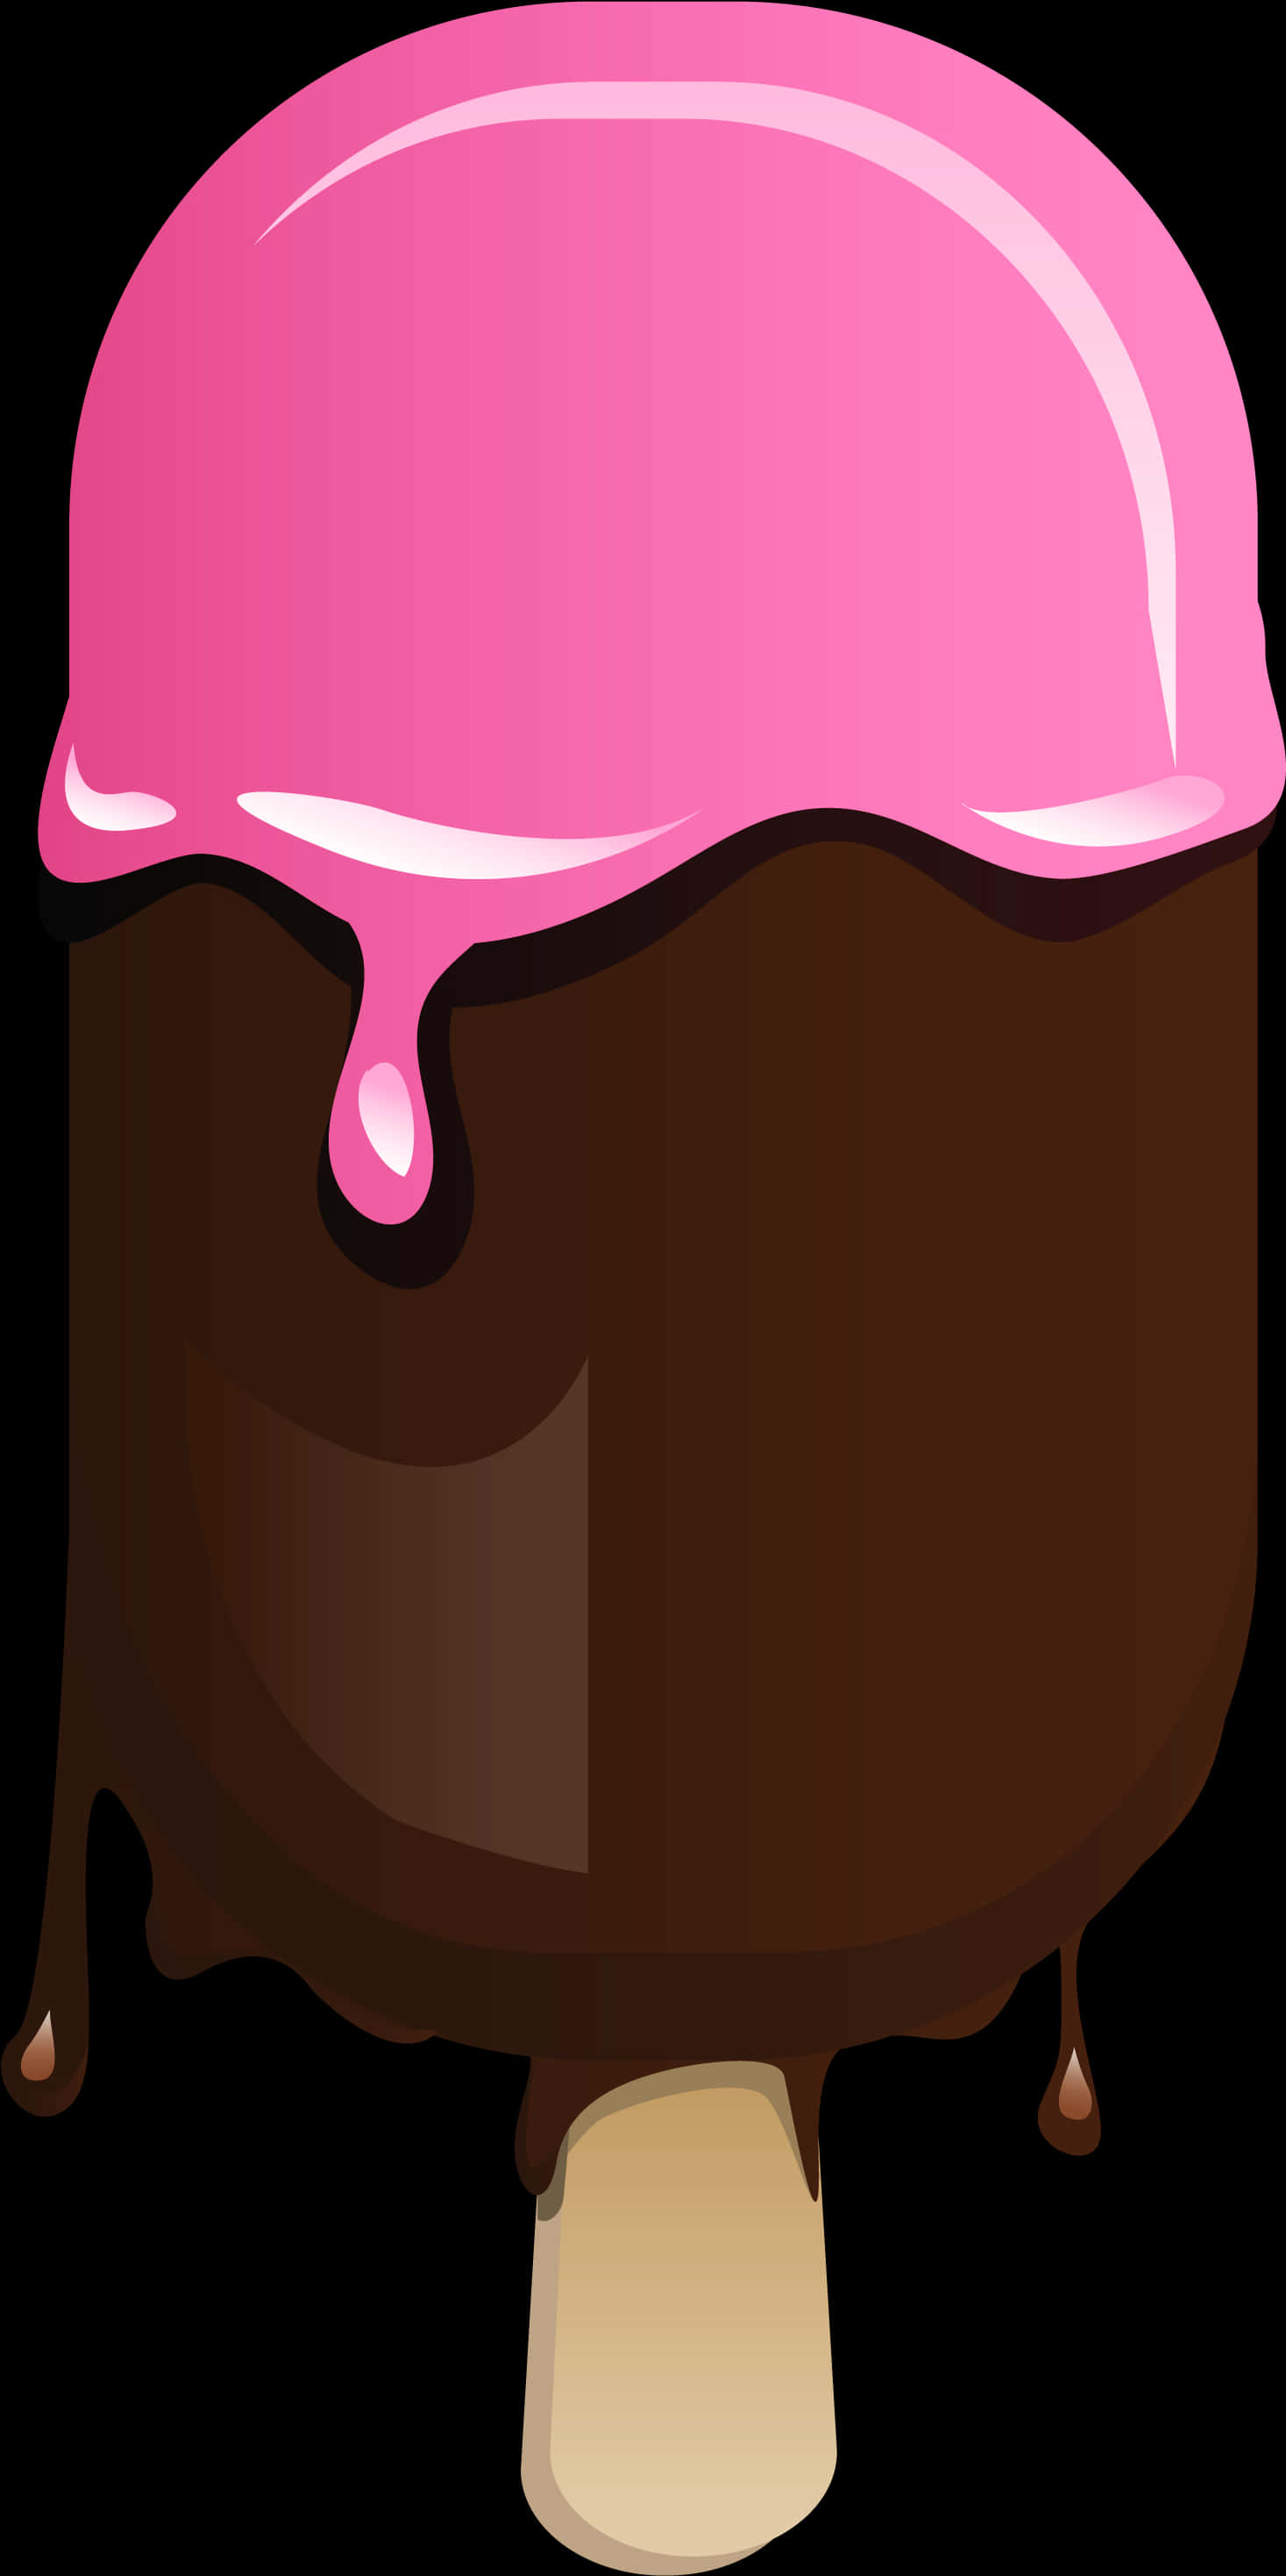 A Chocolate Cup With Pink Icing